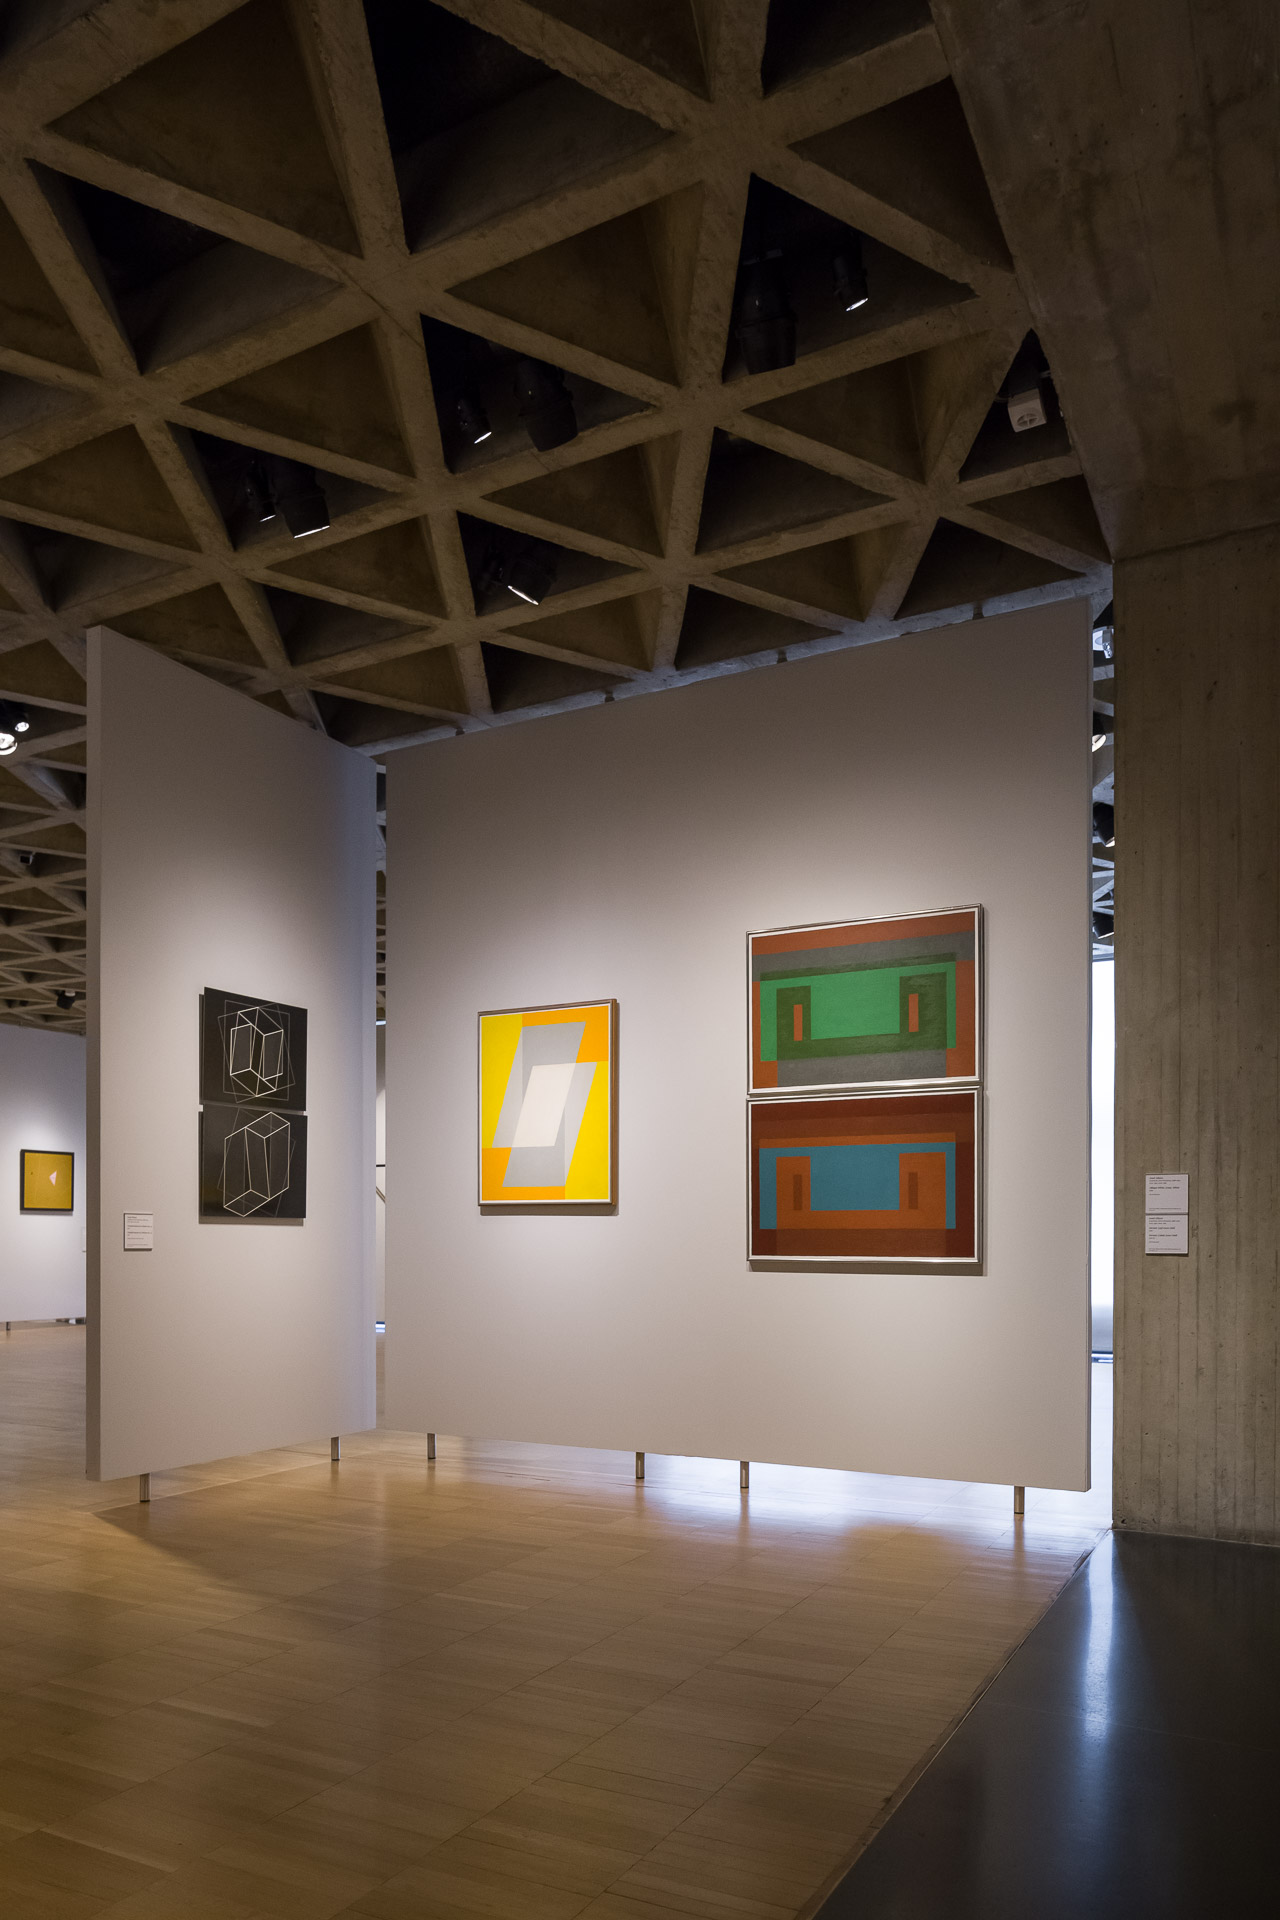 Interior of Yale University Art Gallery in New Haven, CT by Louis Kahn. Photo by Jason R. Woods.